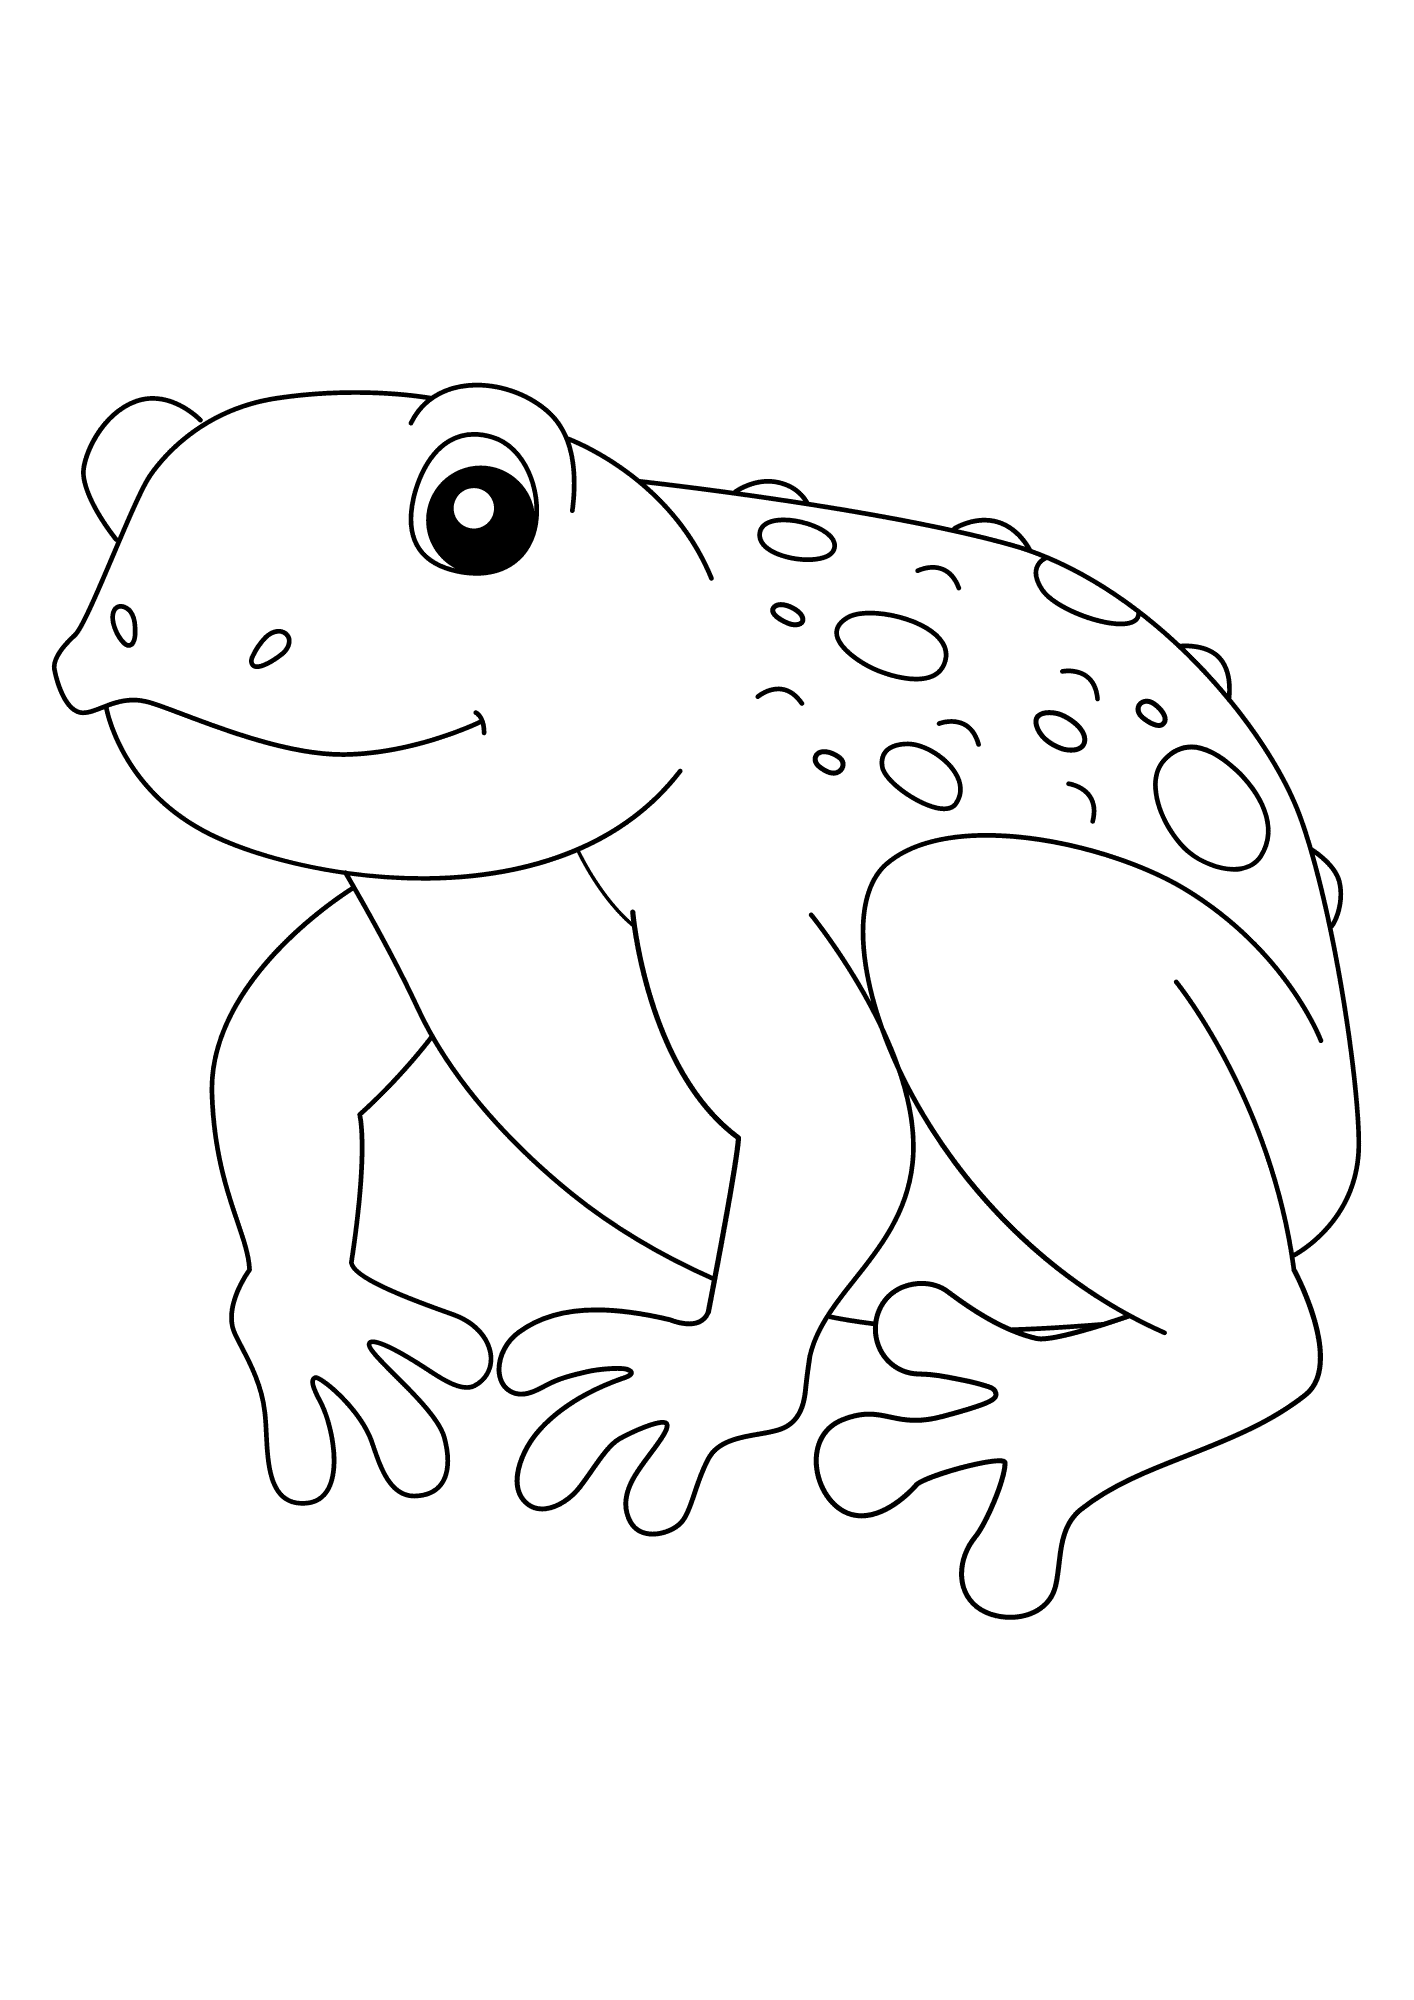 Toad Printable Coloring Page